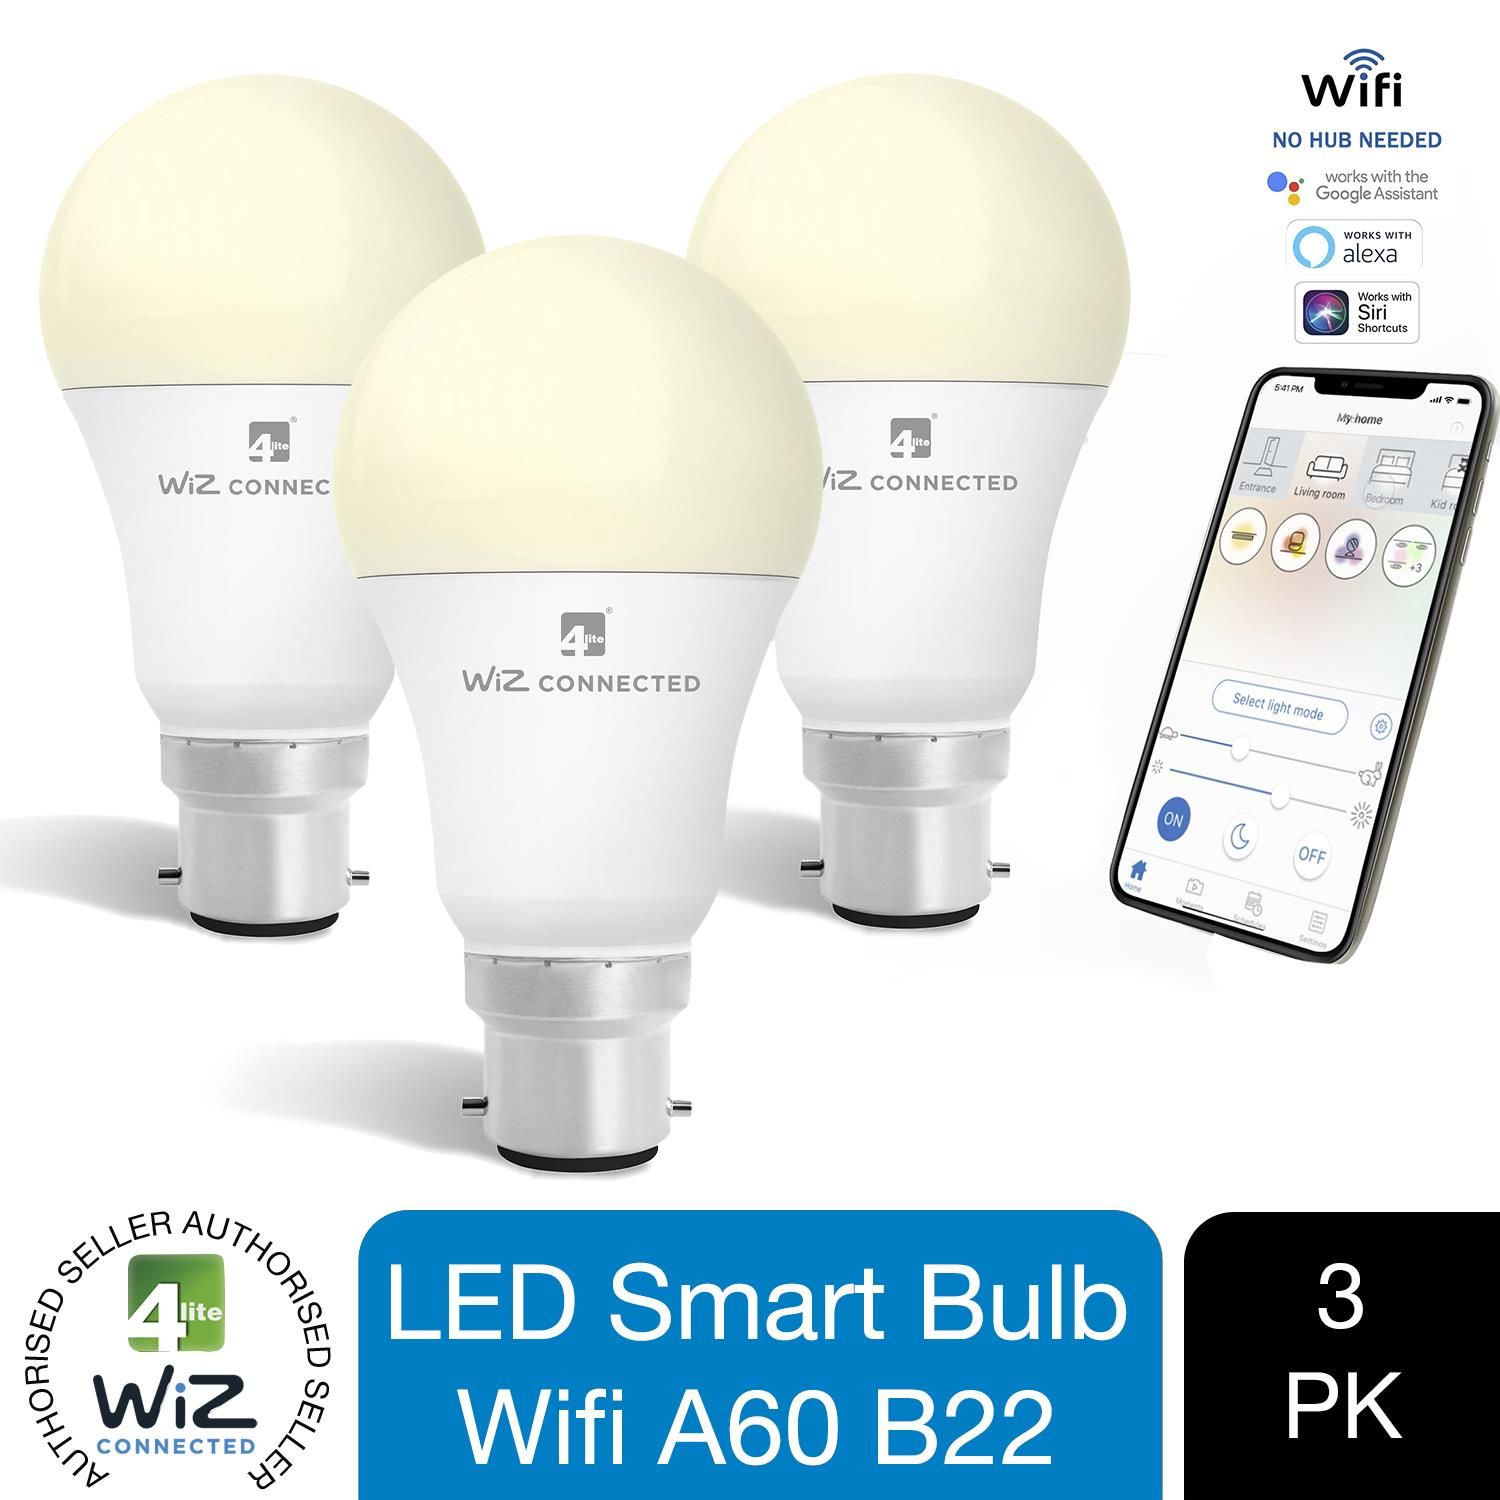 WiZ LED A60 Smart Bulb Wifi BC (B22) Warm White & Dimmable, 3 Pack
Bring human-centric lighting into your living and working environments with this smart LED A60 whites bulb. Retrofit into any lamp shade and choose the lighting conditions which suit you best from a wide range that starts with soft warm white and ends with bright daylight. Wi-Fi connected.

Experience the ideal lighting in your home at any time of the day or night. Download the easy-to-use app via the Google Store or iOS App Store, and control your lights in a flash. It’s compatible with all Apple and Android smartphones, so everyone in the family can enjoy the WiZ experience. Or, if you want to adjust the bulb with your voice, you can use your Google Home or Amazon Alexa speaker. It’s never been simpler to create the ultimate atmosphere in your home.

The Wi-Fi enabled WZ20826011 is also compatible with other smart devices through IFTTT. It can notify you when your doorbell rings, or turn off when you get into bed. All you need is a B22 Bayonet fixture, and you can get started on revolutionising your lighting

Luminosity : 2,700K to 6,500K , CRI 80, 25,000 lifetime hours, 50,000 switching cycles, Non-directional light, 810lm ,  110cd

Physical : White, B22 base type, Heatsink: plastic and aluminium, 
Experience the ideal lighting in your home at any time of the day or night. Bring human-centric lighting into your living and working environments with this smart LED A60 whites bulb.